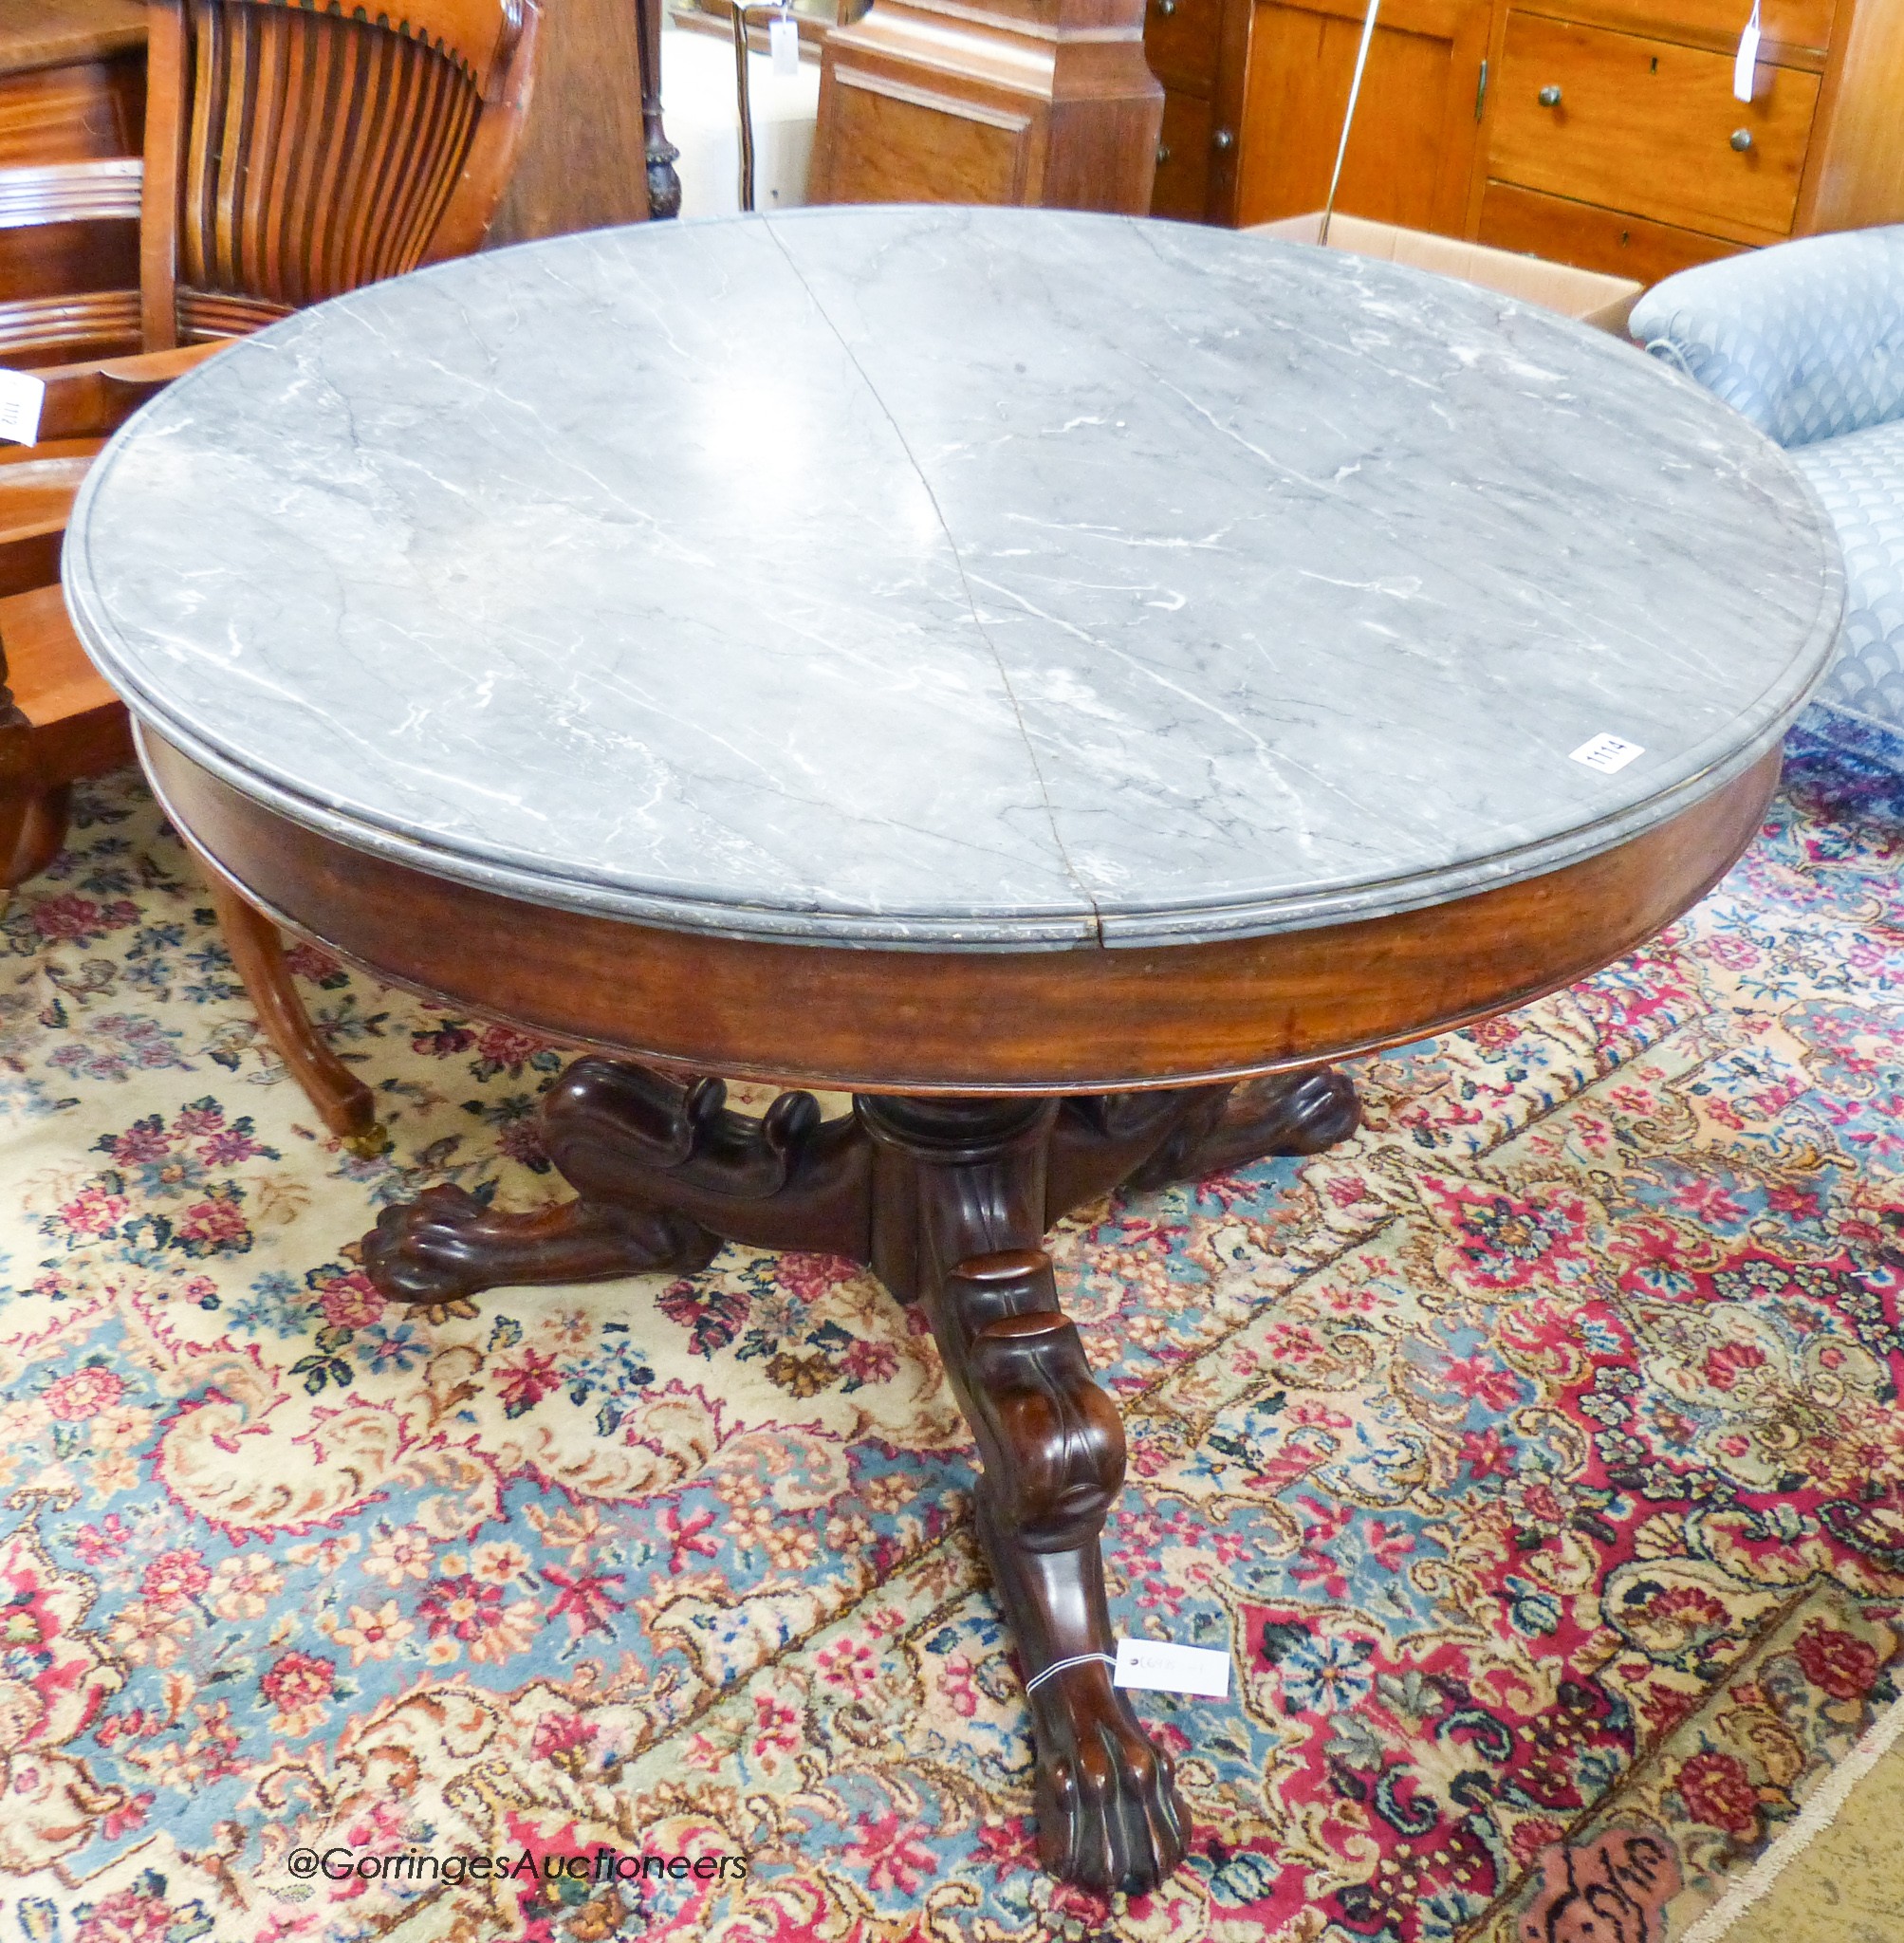 An early 19th century French mahogany circular marble topped centre table